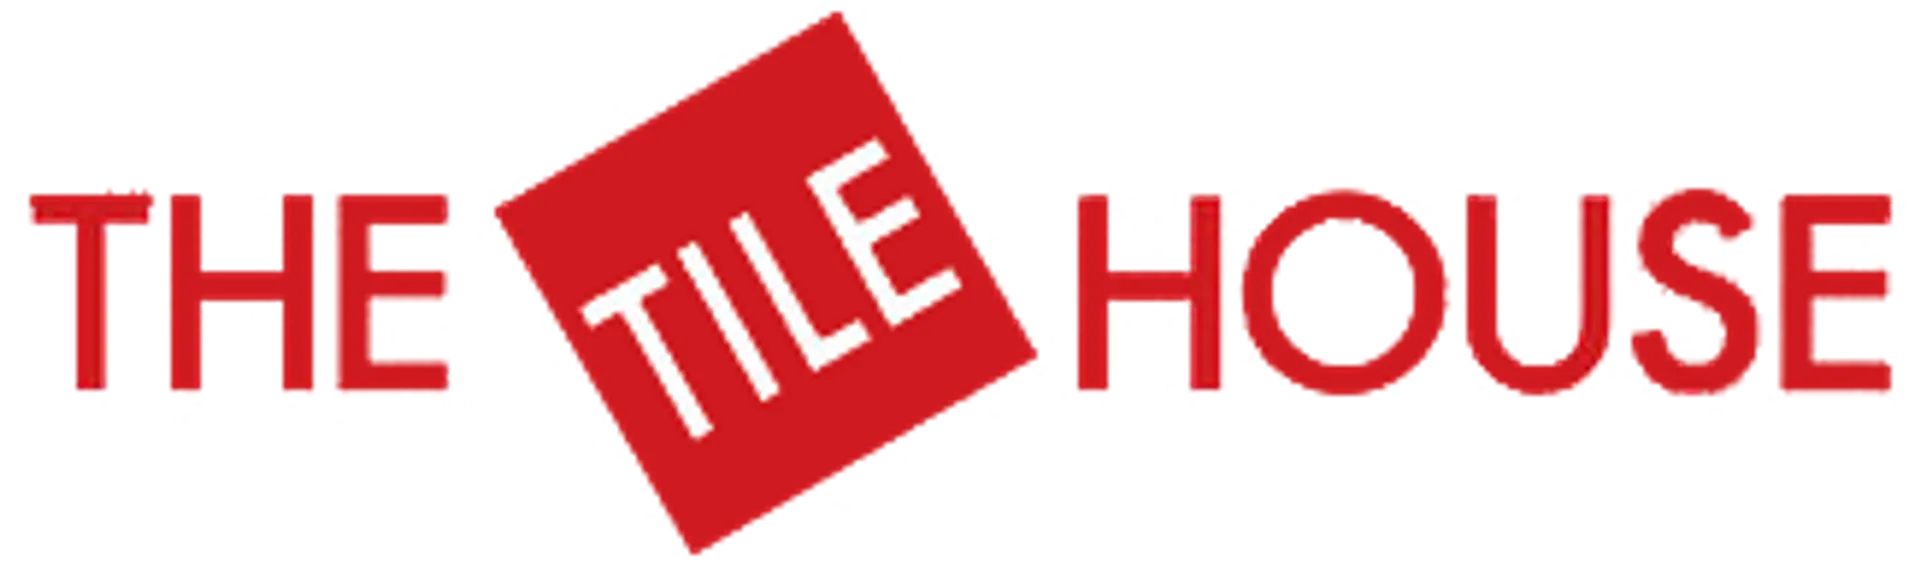 THE TILE HOUSE logo. Current weekly ad